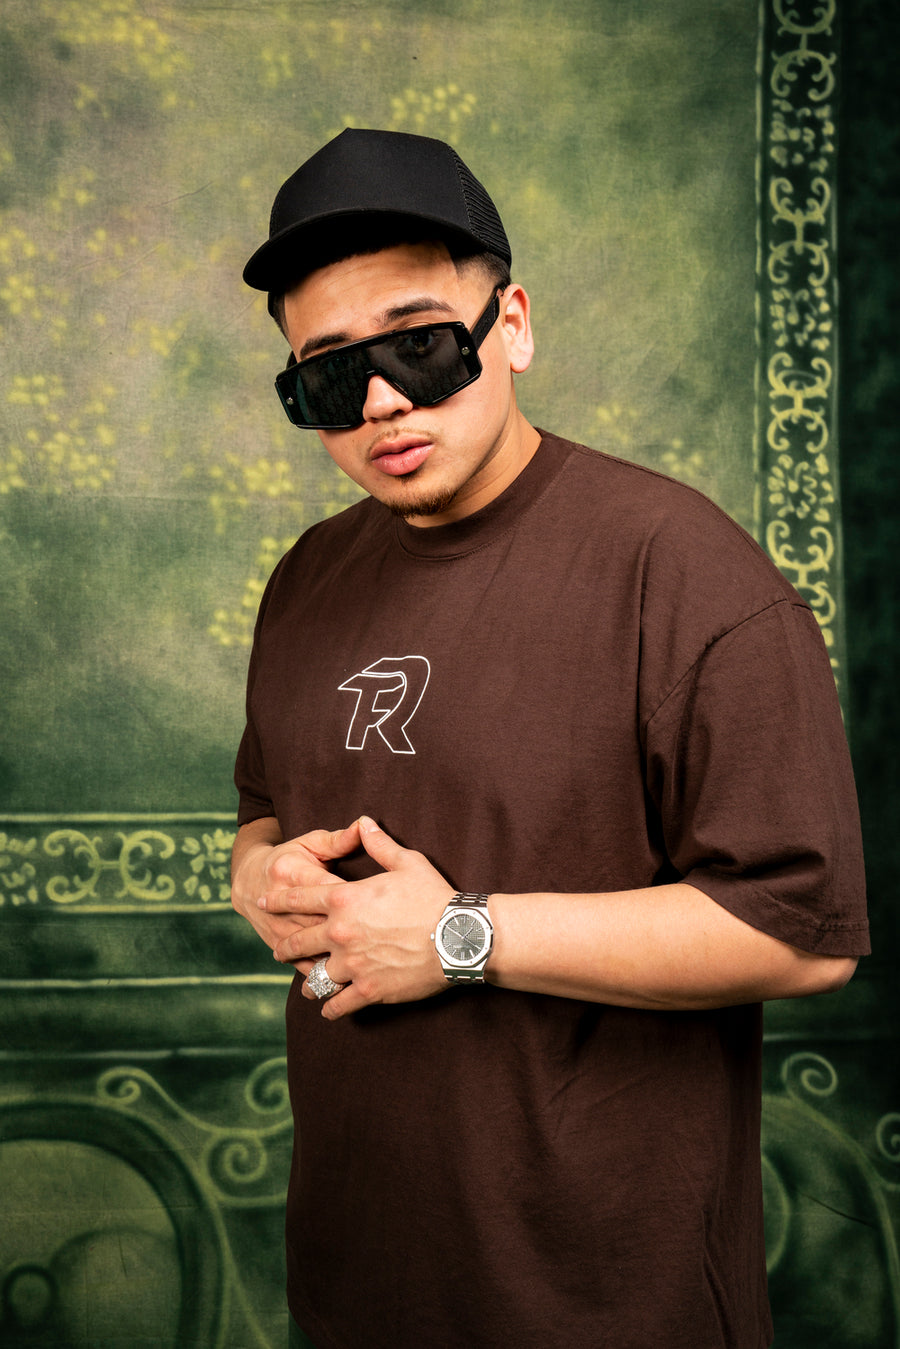 OUTLINE FR - BROWN S/S TEE